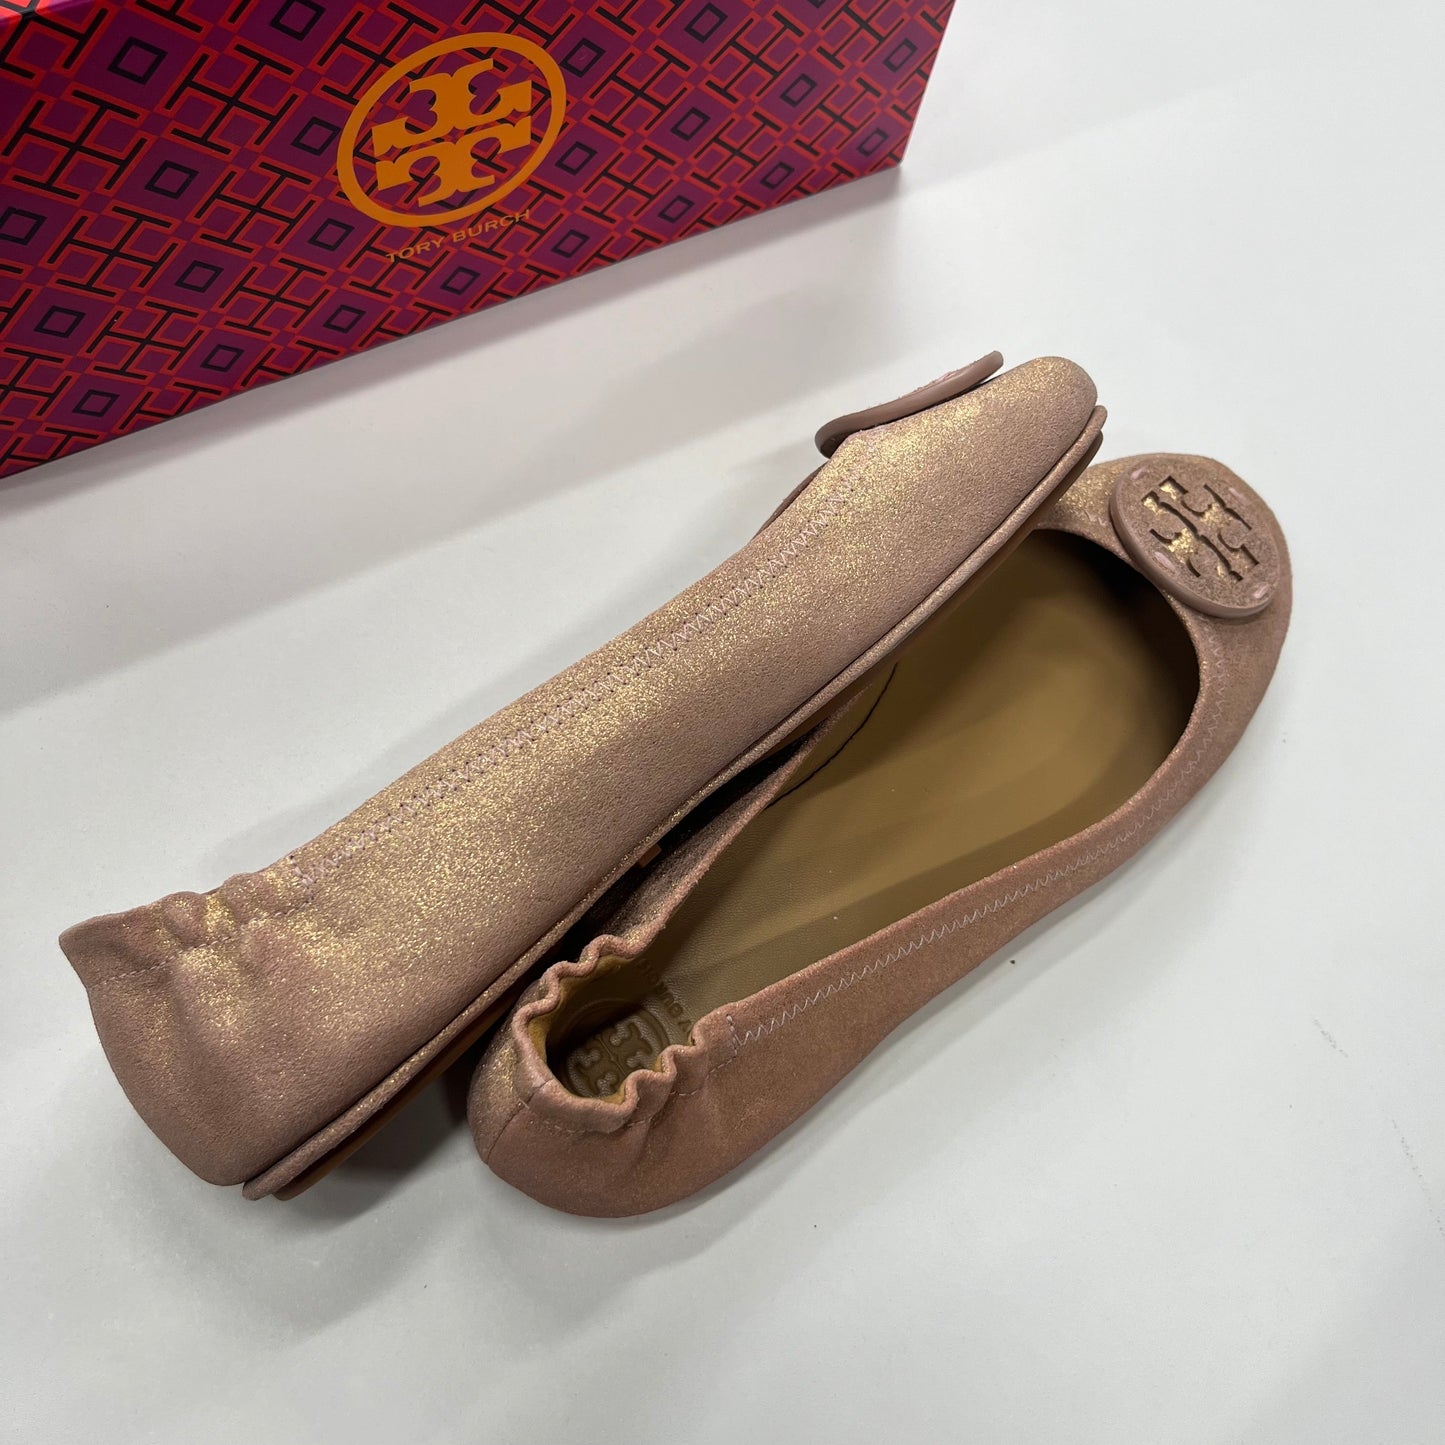 Multi-colored Sandals Flats Tory Burch, Size 9.5